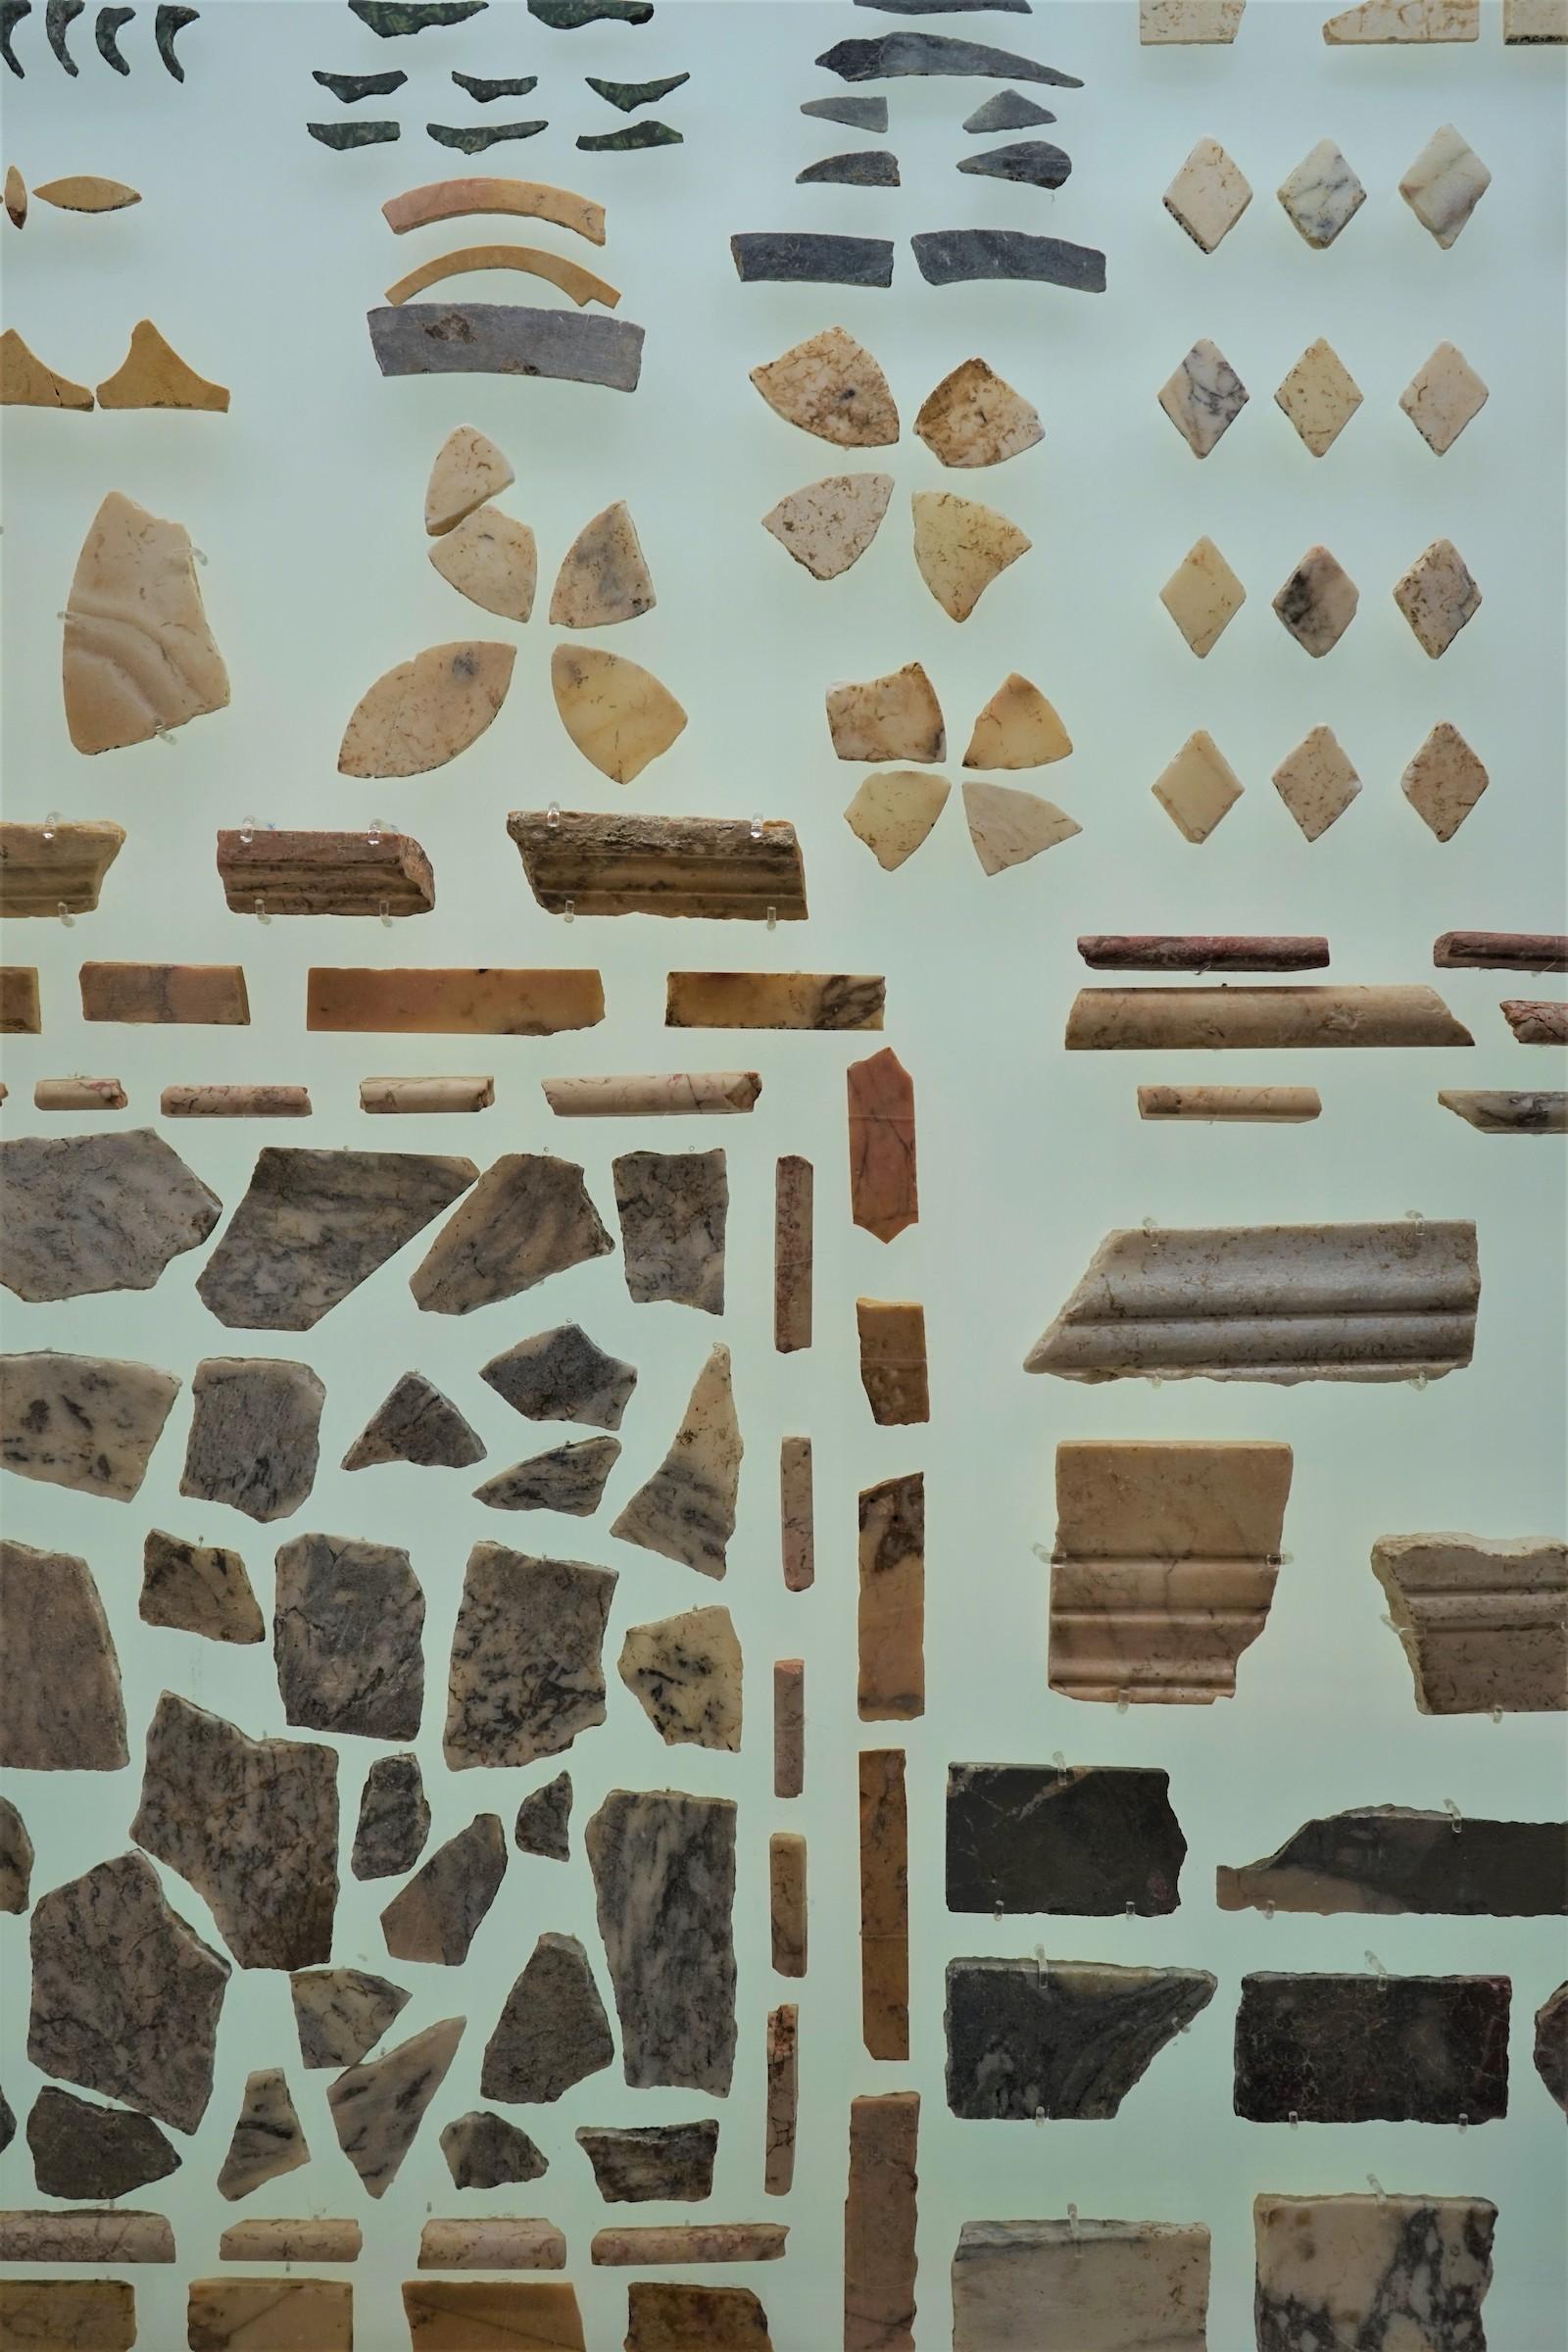 Fragments of colored marble wall decoration (opus sectile). Photo by Christopher Siwicki.